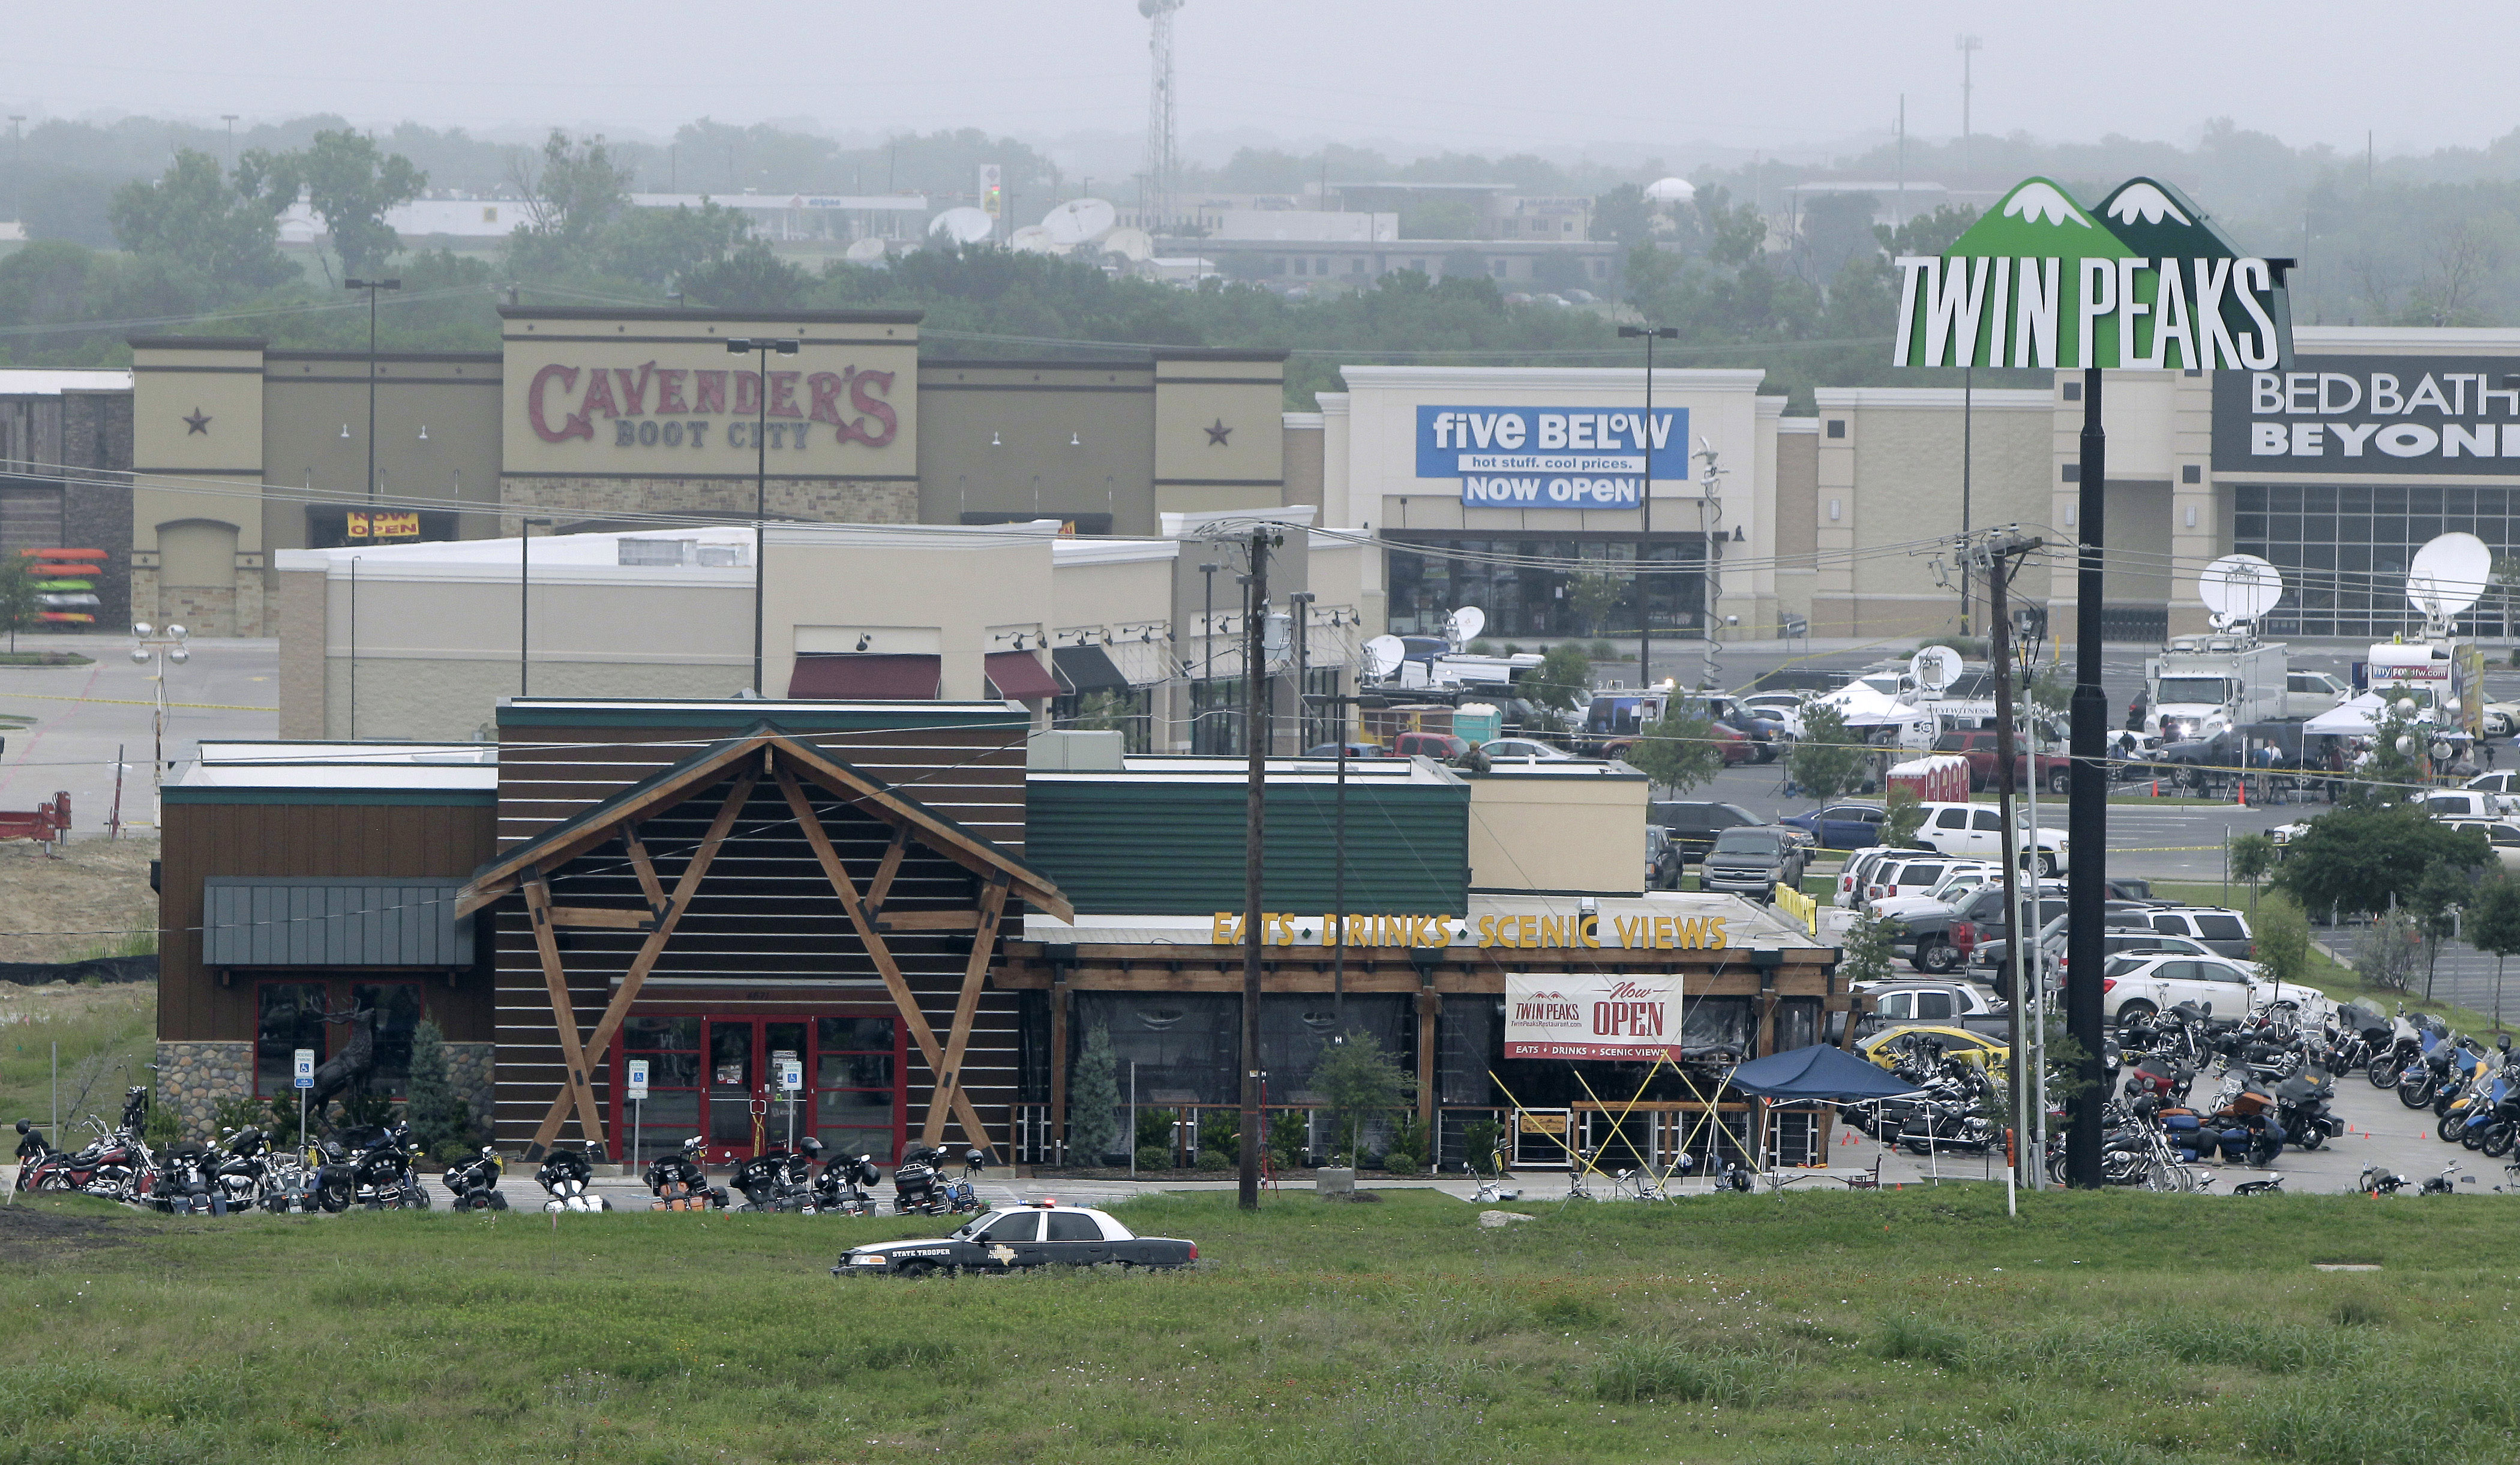 The scene of a shootout in Waco, Texas at the Twin Peaks restaurant that left 9 dead and 18 wounded. (Getty)